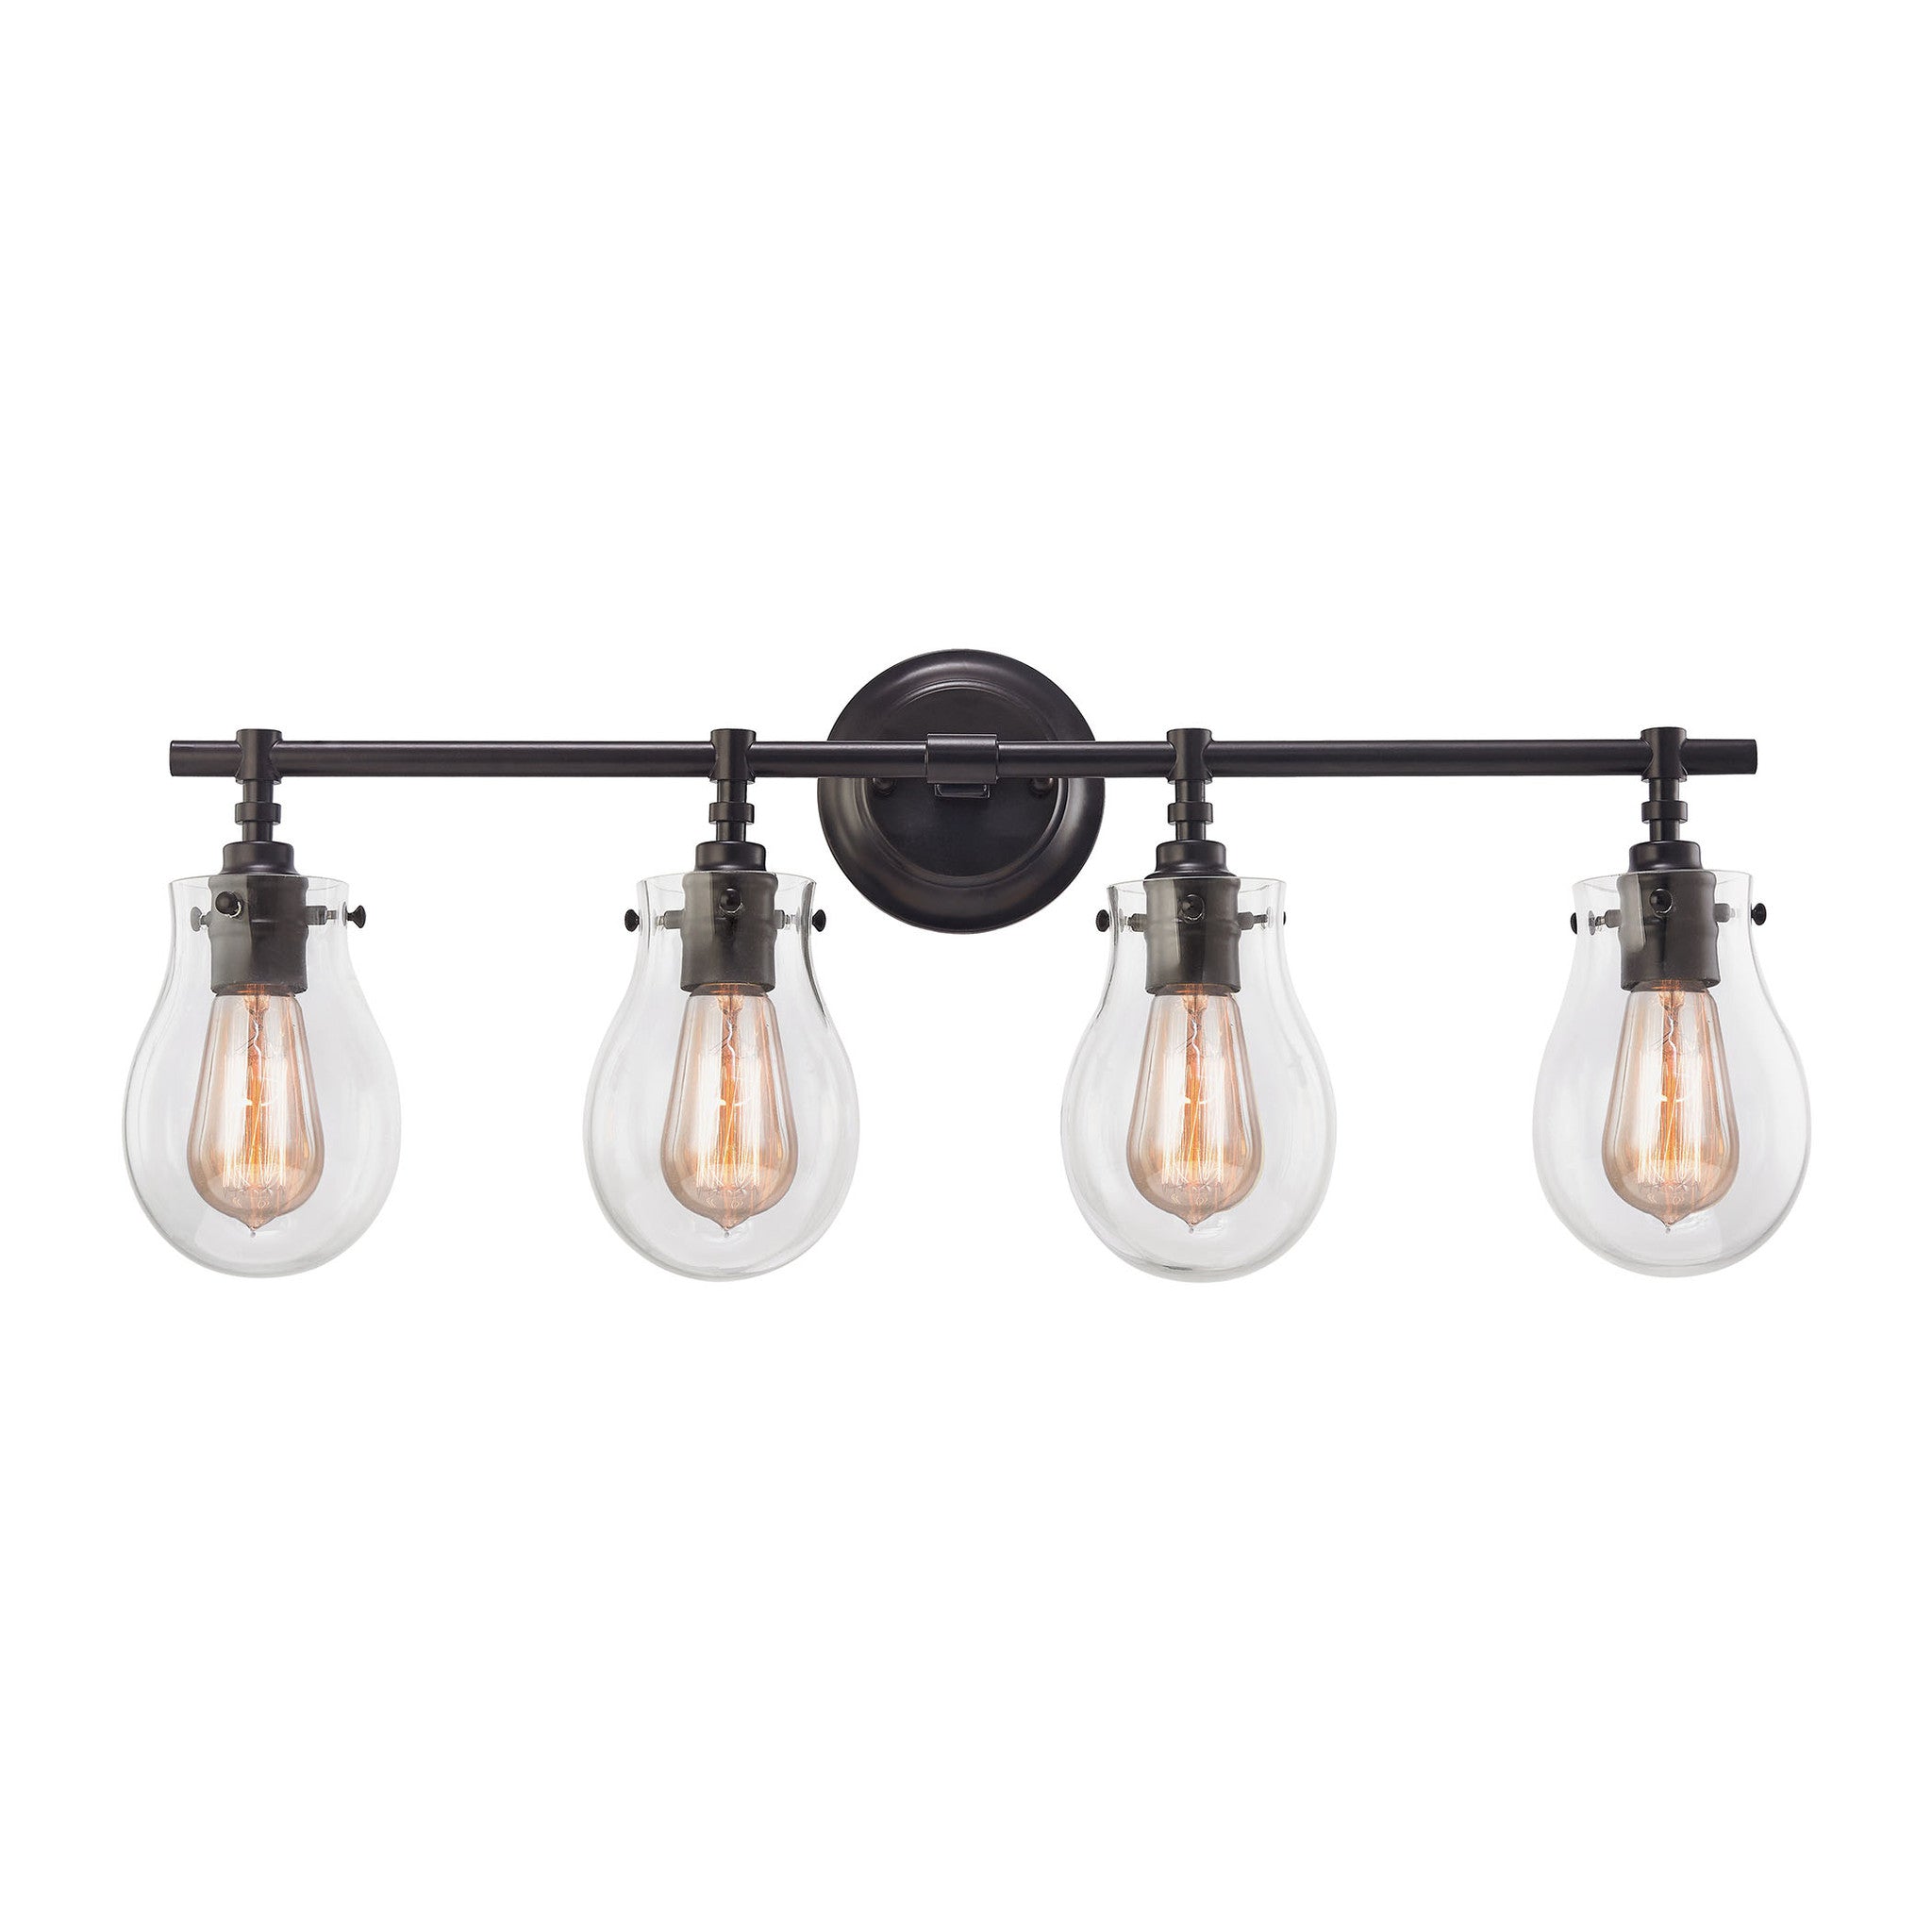 4 Light Jaelyn Vanity Light in Oil Rubbed Bronze with clear teardrop glass shades by Elk Lighting 31930/4